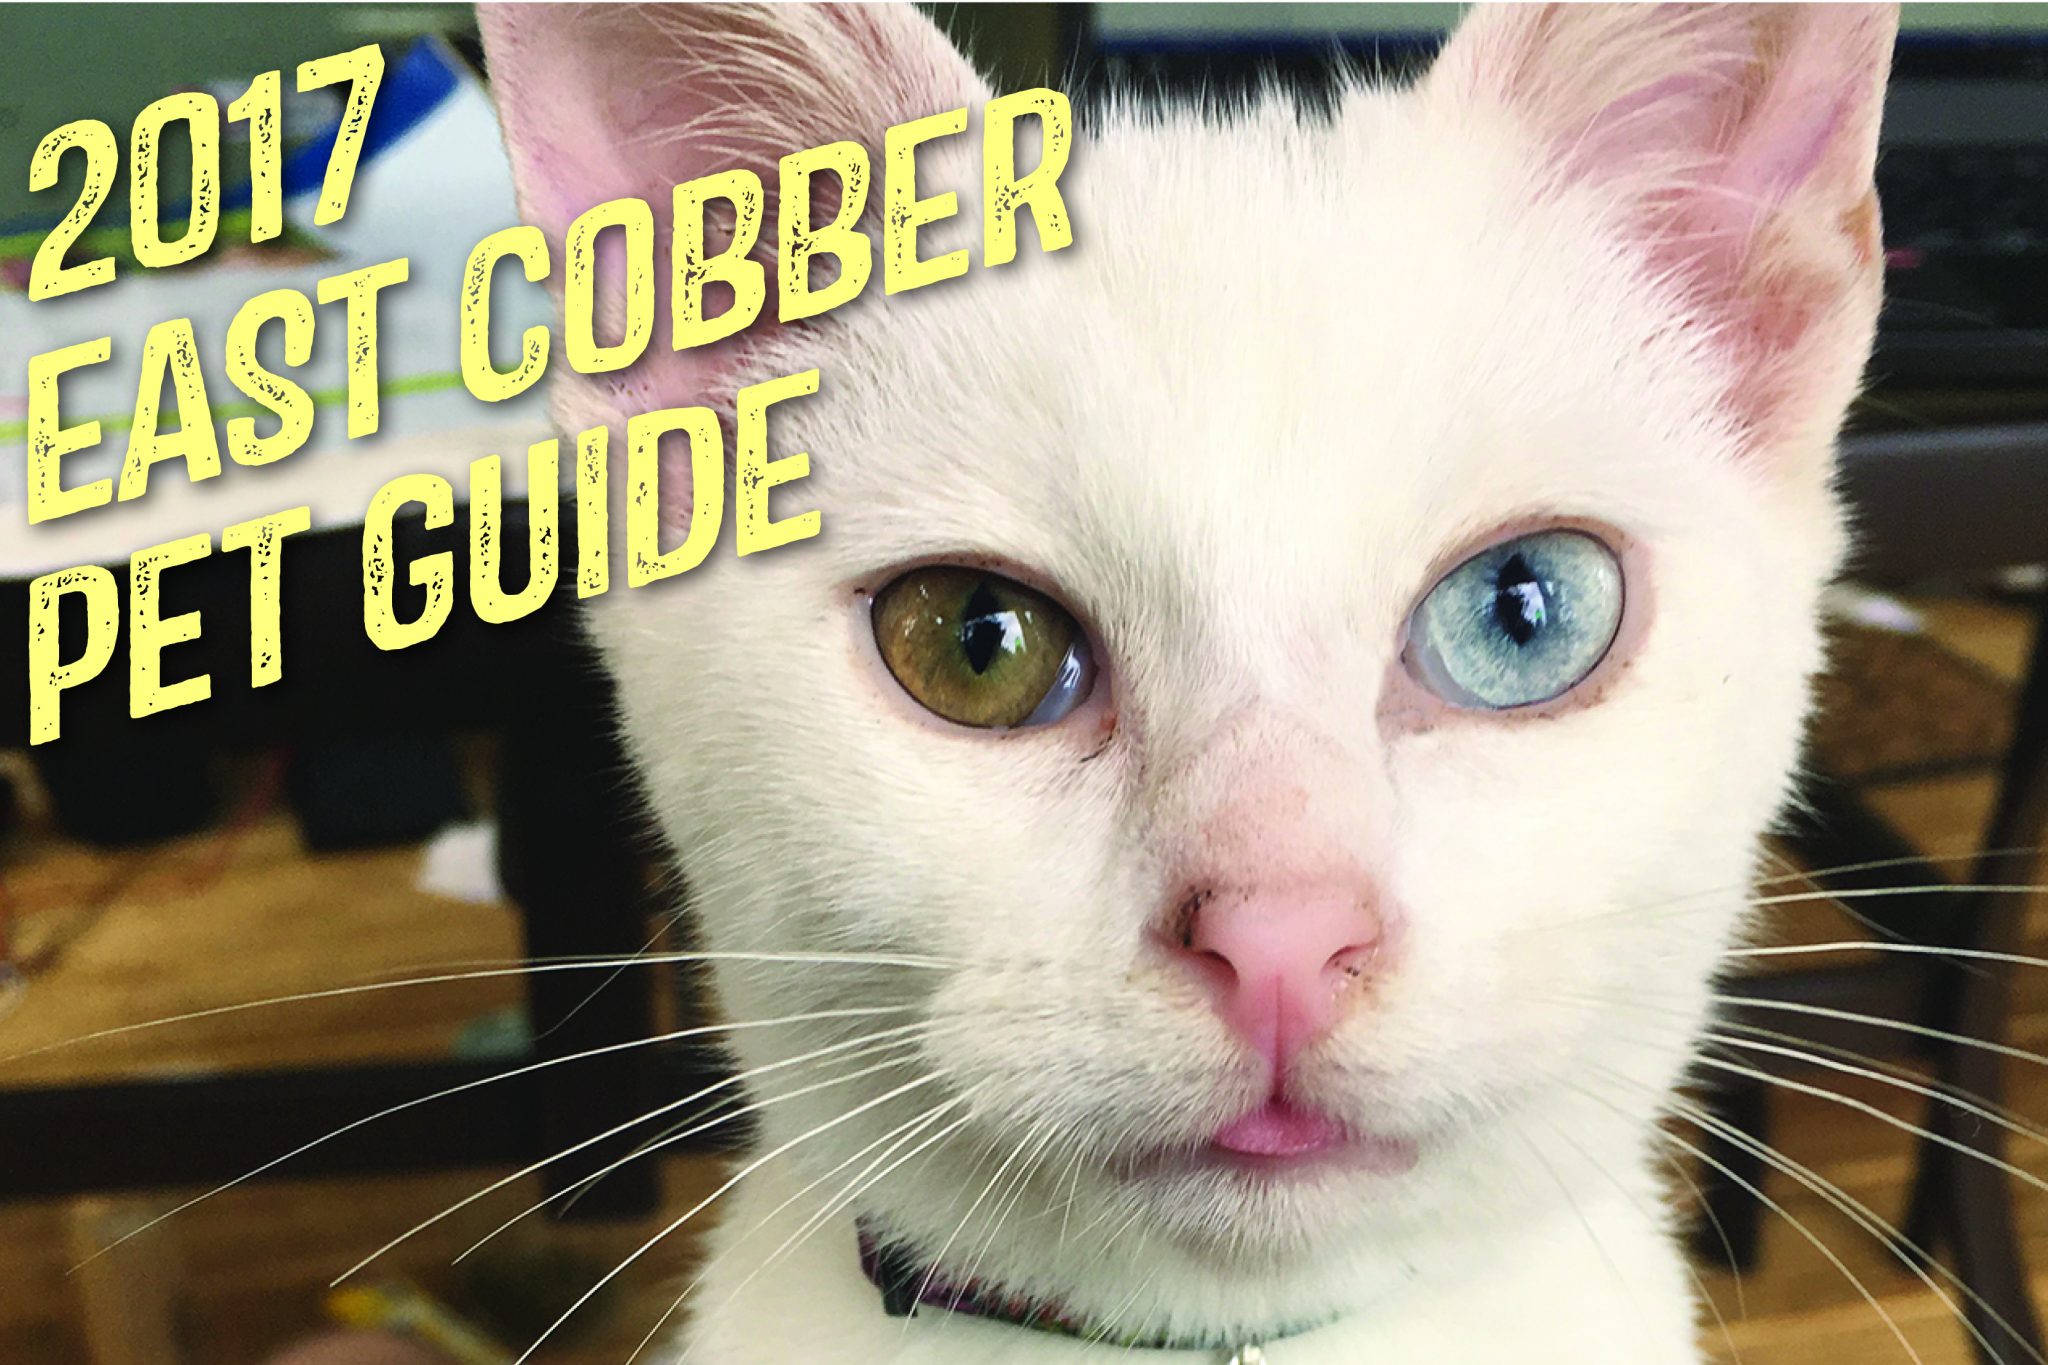 EAST COBBER is Proud to Announce Its 11th Annual Pet Guide 4